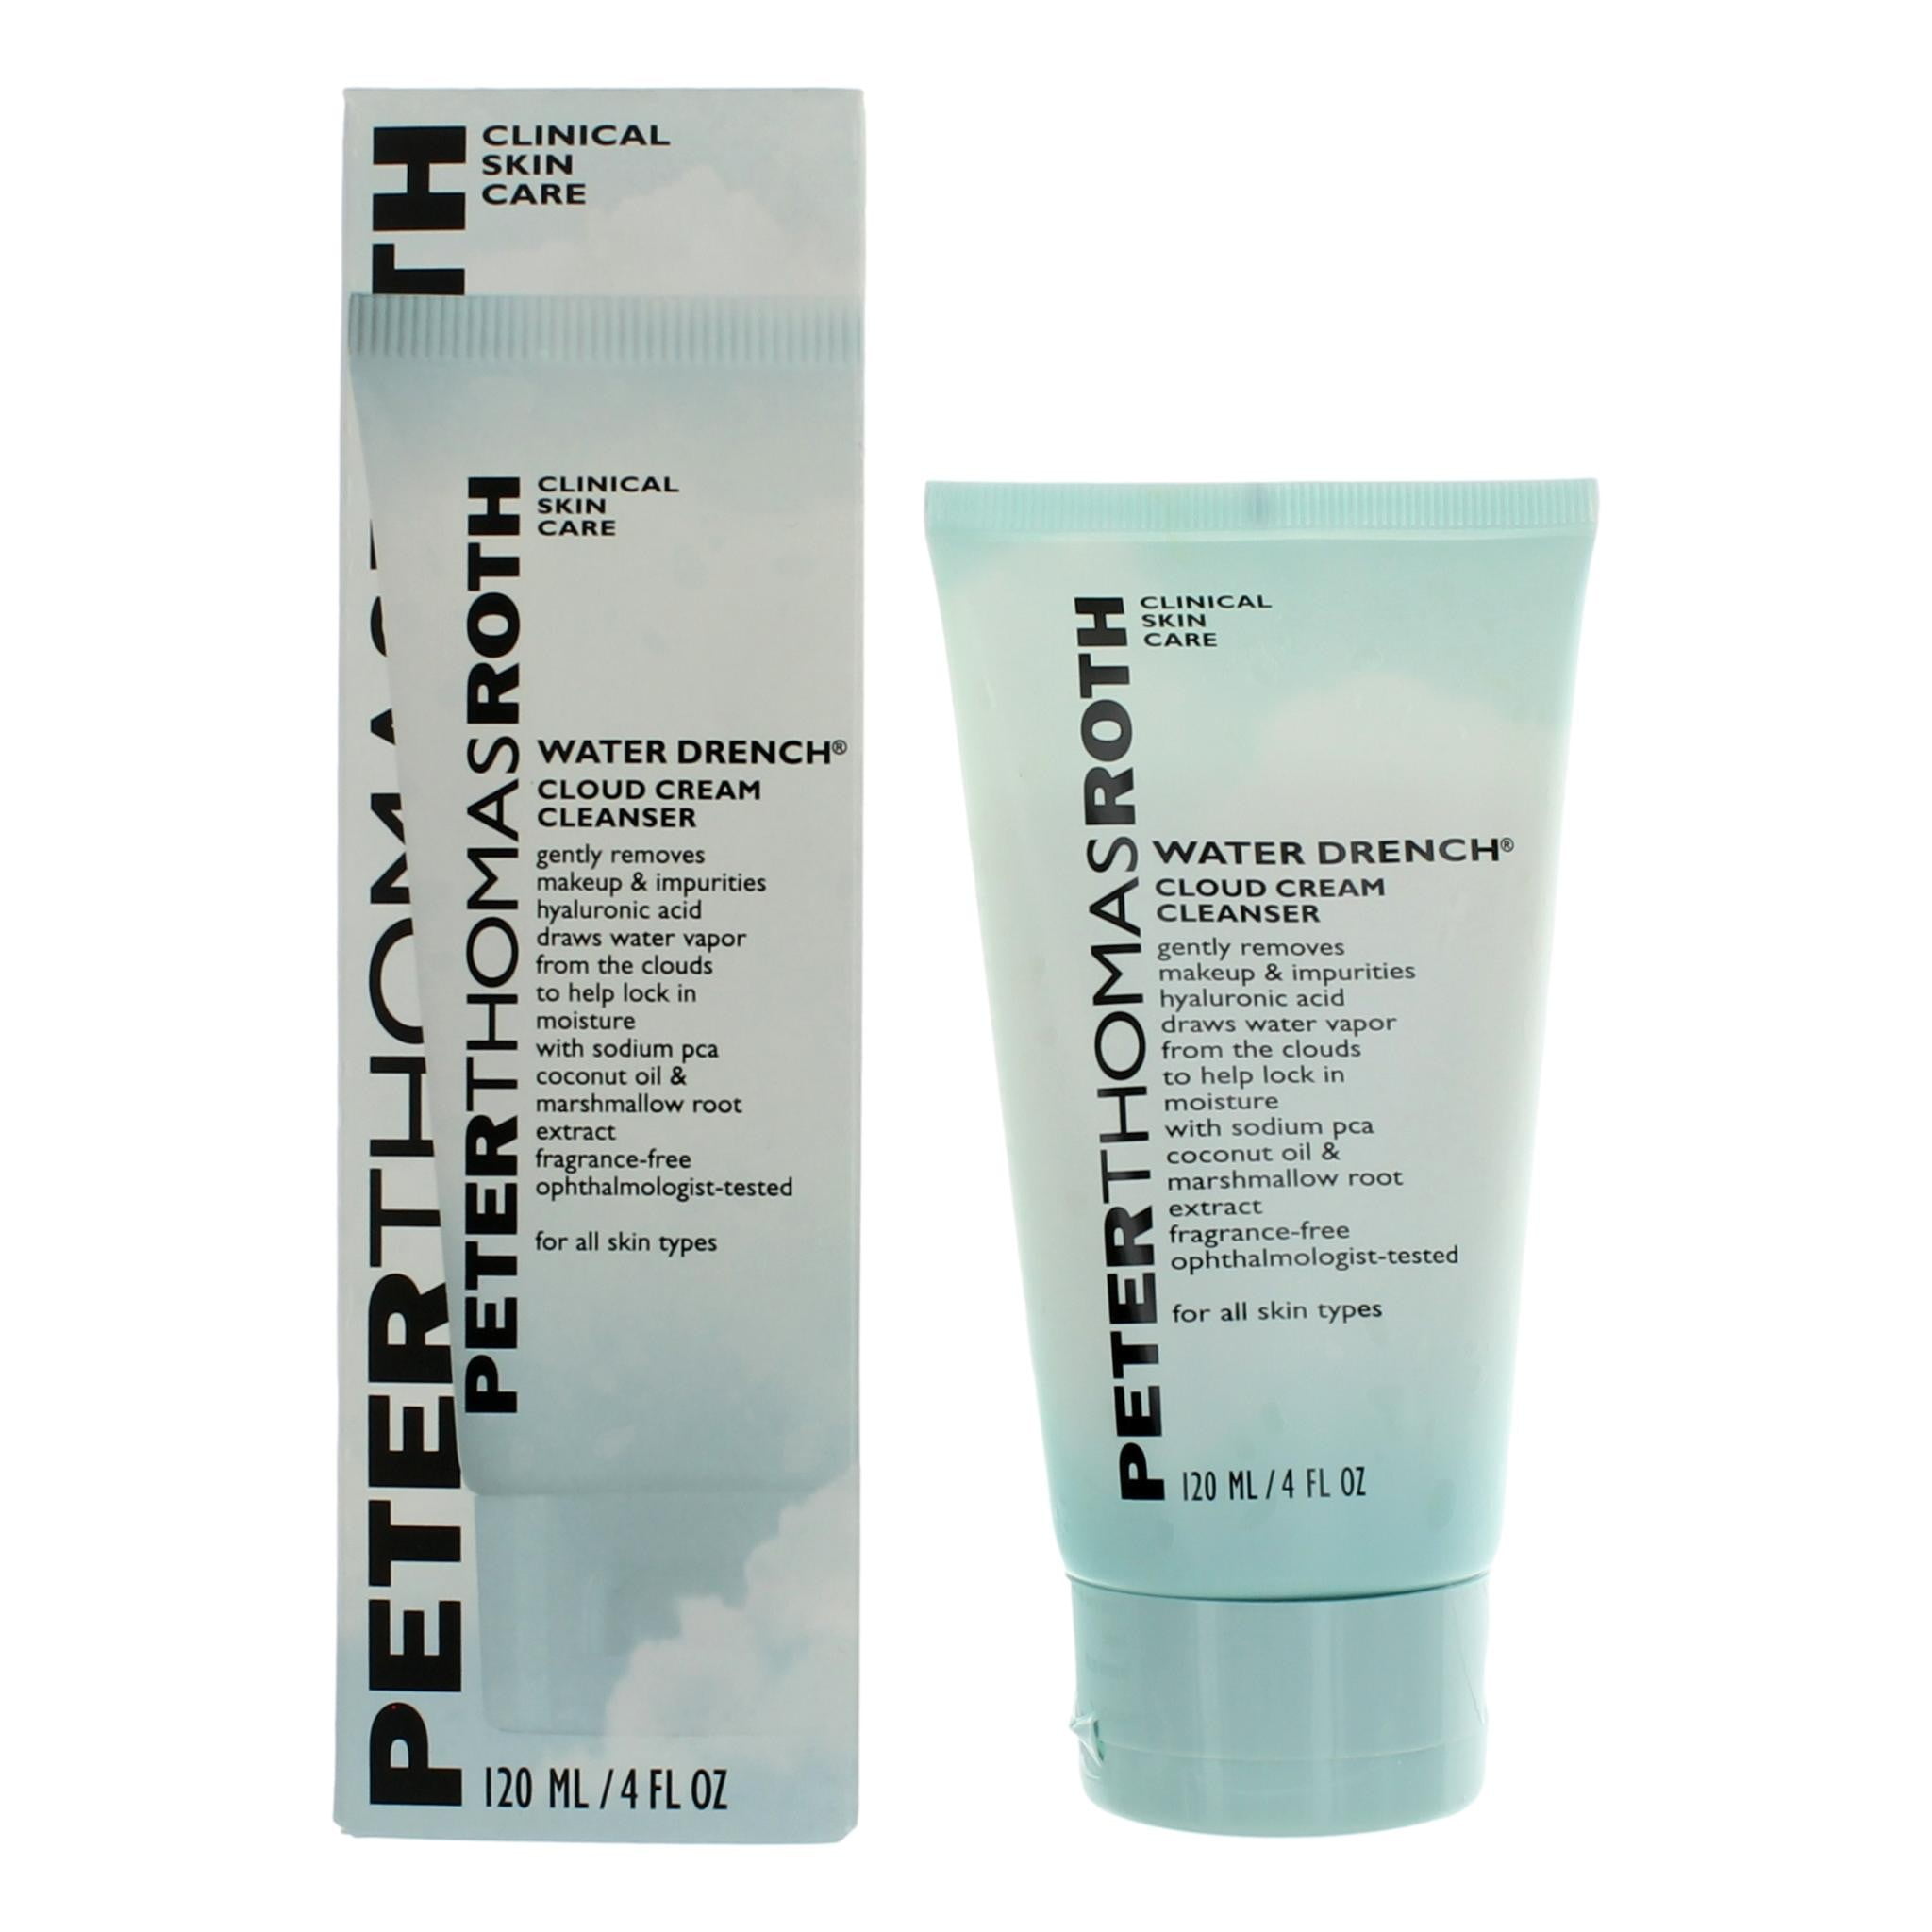 Peter Thomas Roth Water Drench Cleanser 4 oz - image 1 of 7